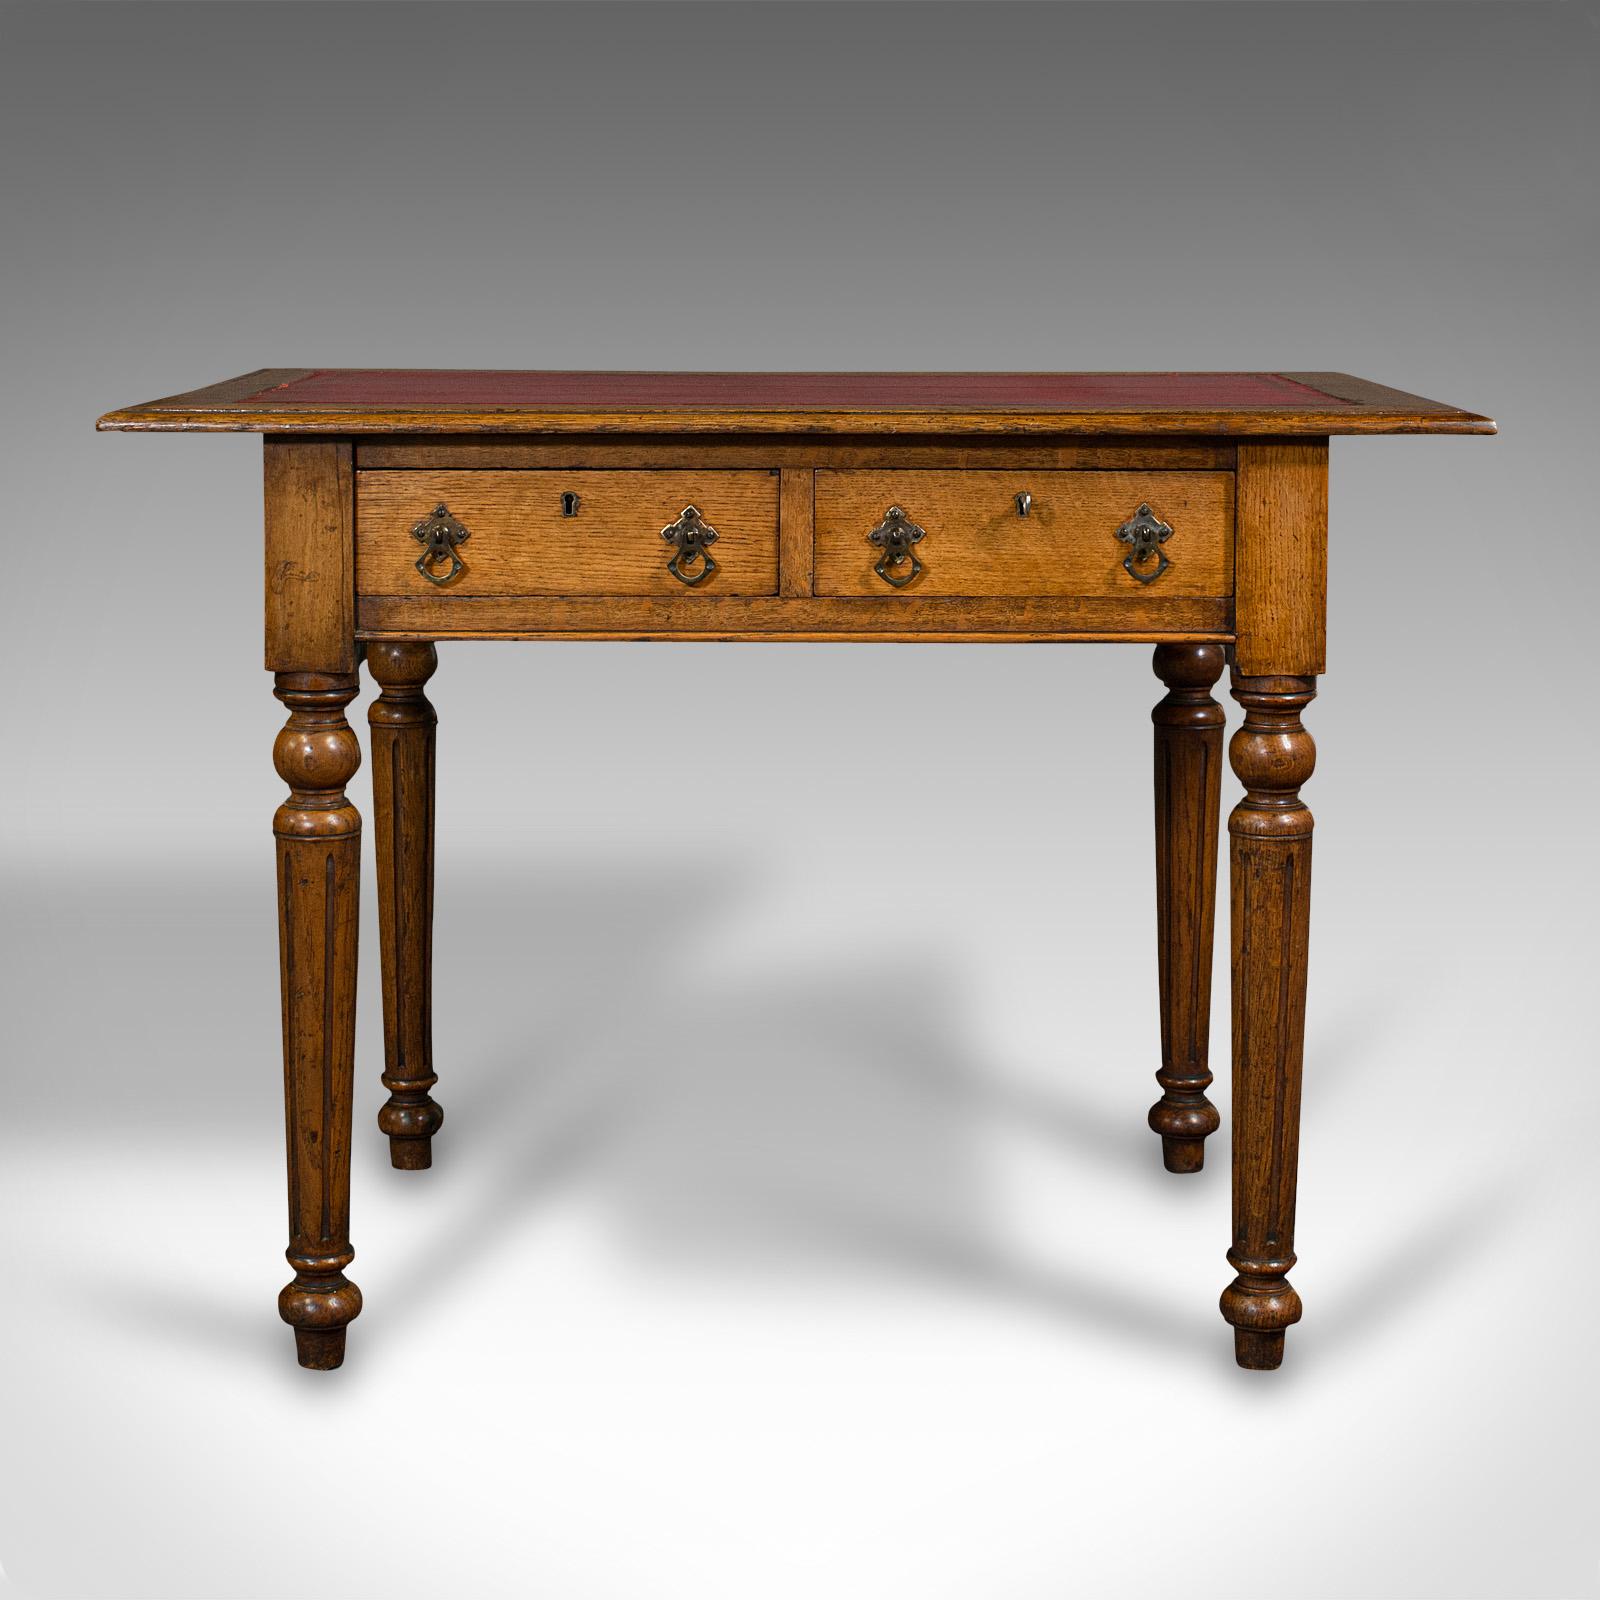 This is a small antique correspondence table. A Scottish, oak writing desk with skiver, dating to the Aesthetic period, circa 1880.

Diminutive stature, ideal for the reception hall or nook
Displaying a desirable aged patina and in good